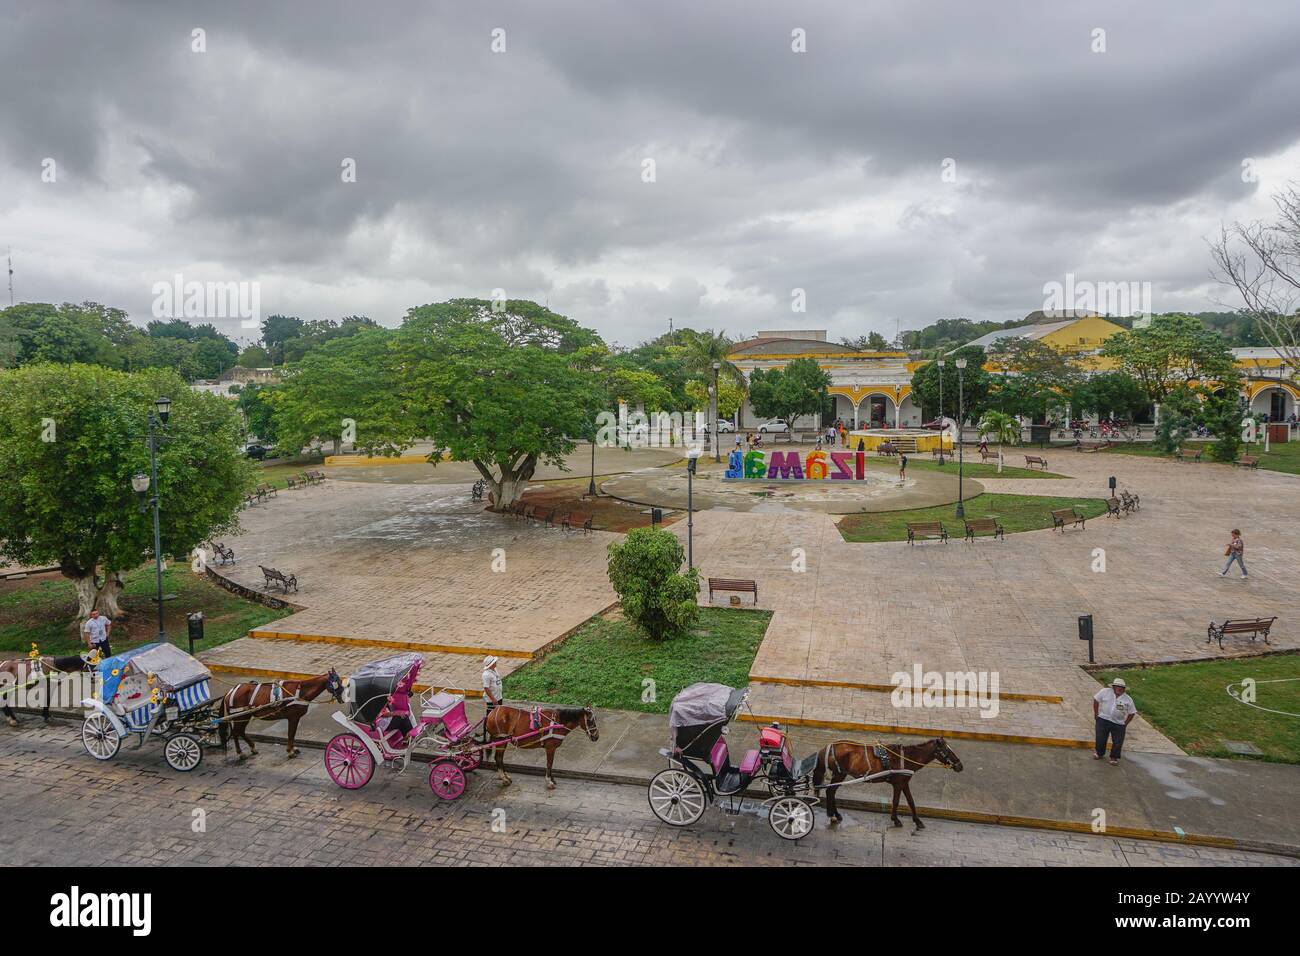 Izamal, Yucatan, Mexico: Horses and carriages wait for passengers along the main plaza of Izamal, under a cloudy sky. Stock Photo